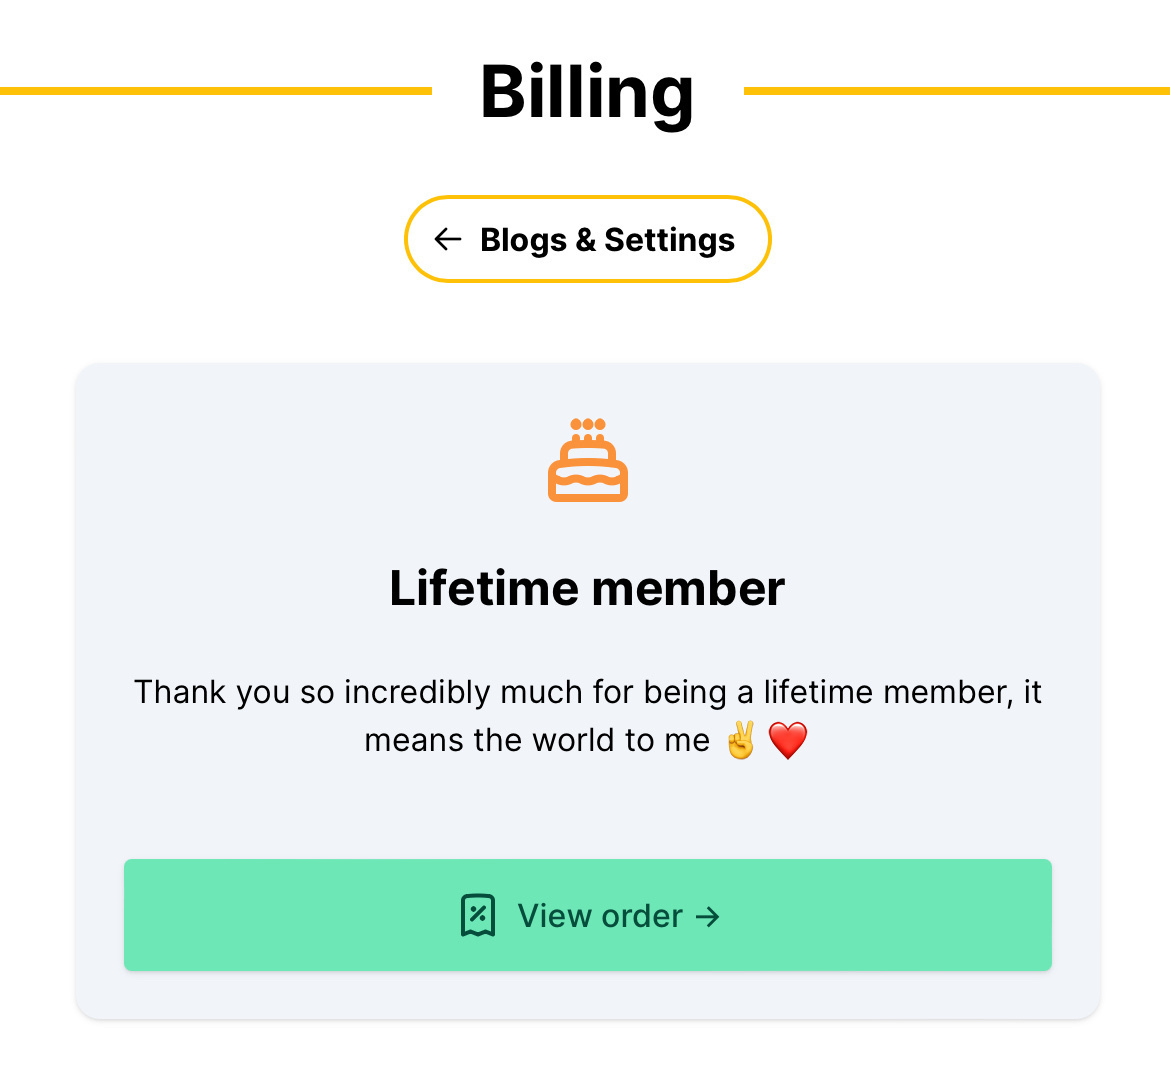 Screenshot of Scribbles billing screen with a ‘Lifetime member’ payment tier and thank you message.